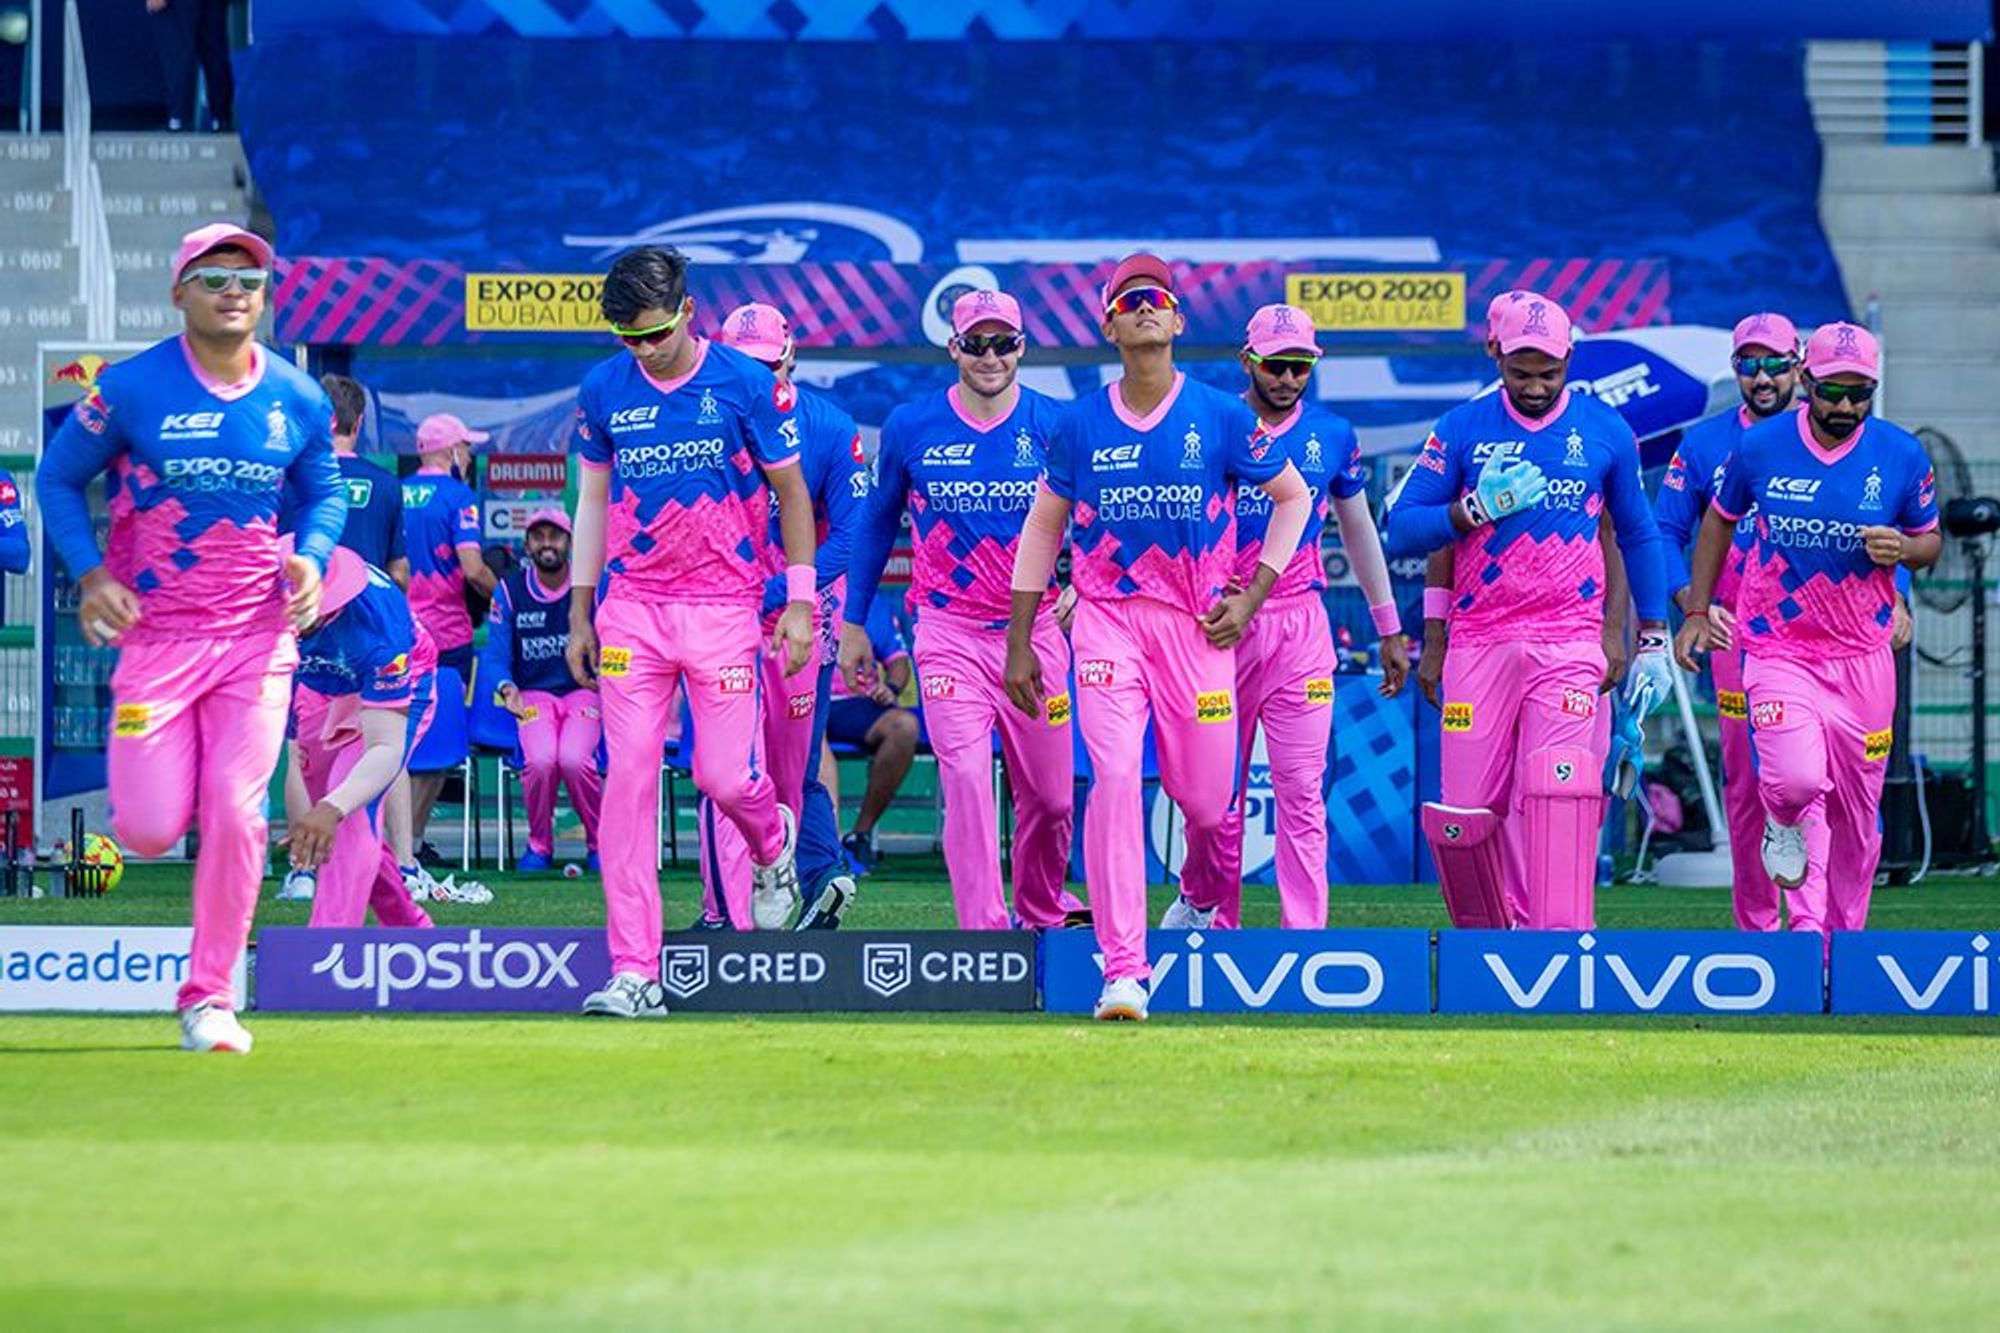 RR slipped to 6th place in the points table | BCCI/IPL